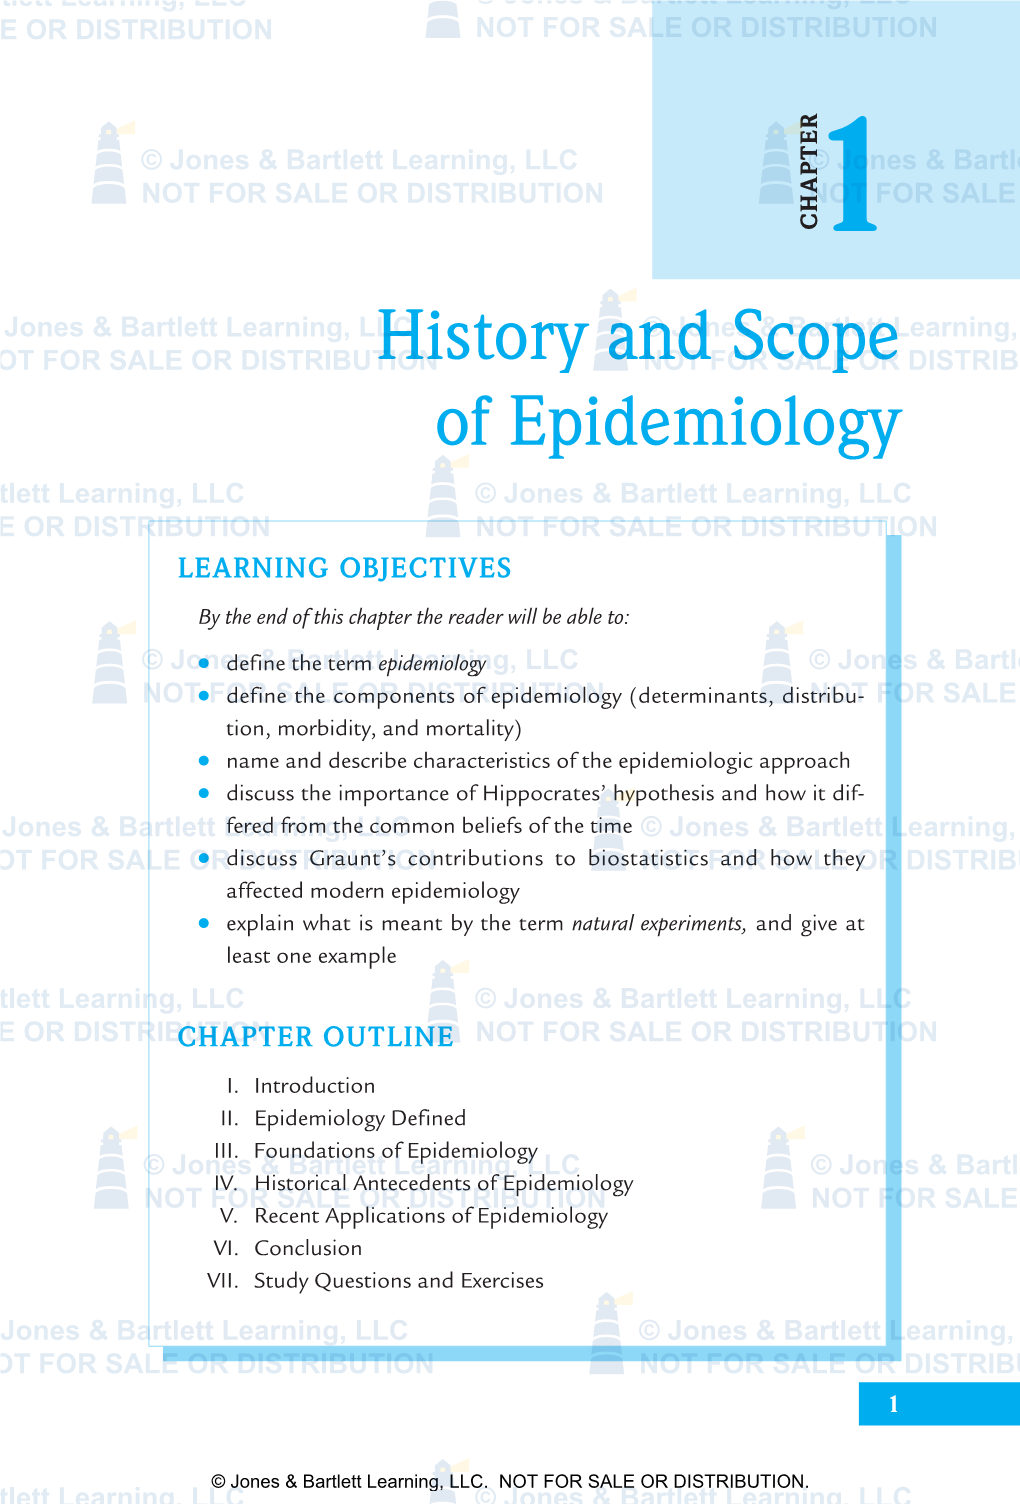 History and Scope of Epidemiology